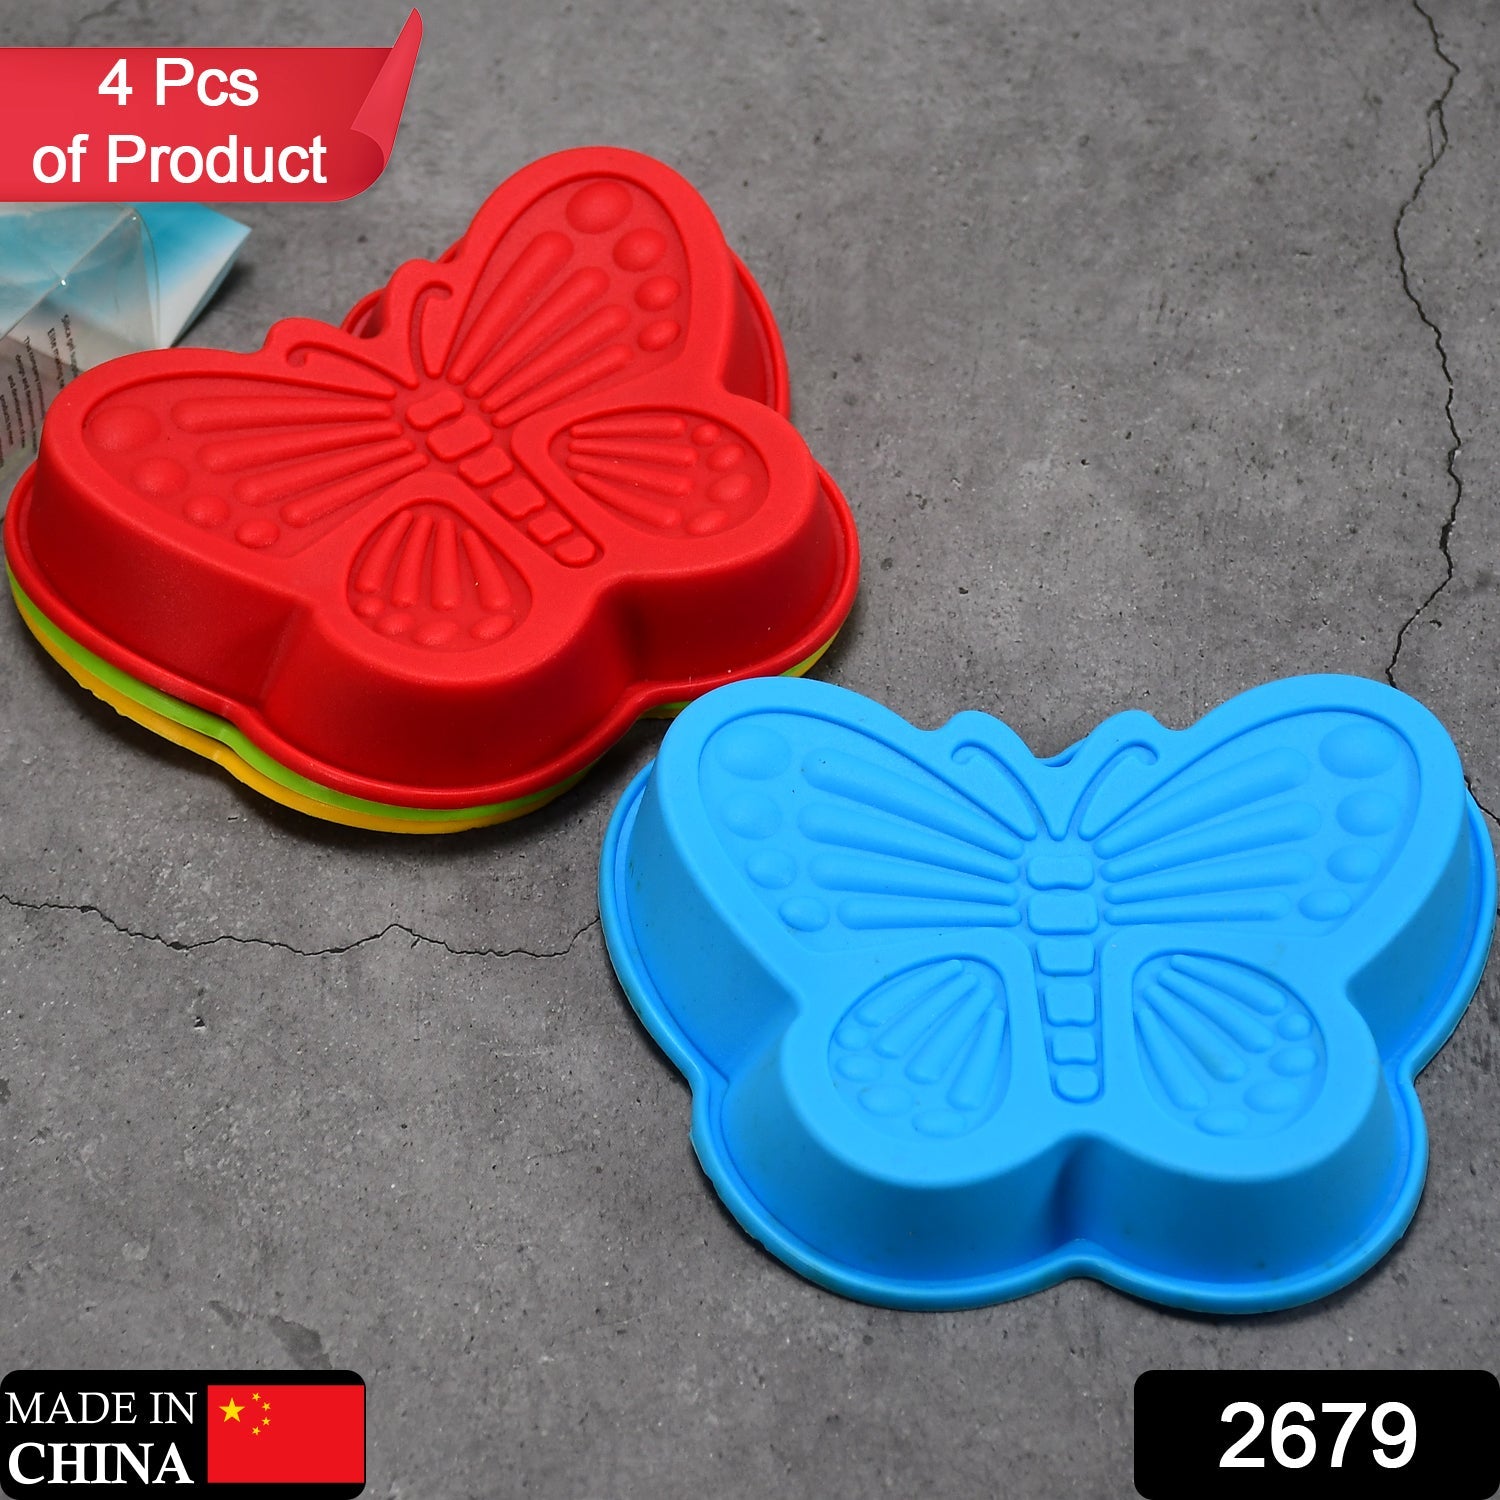 2679 Butterfly Shape Cake Cup Liners I Silicone Baking Cups I Muffin Cupcake Cases I Microwave or Oven Tray Safe I Molds for Handmade Soap, Biscuit, Chocolate, Muffins, Jelly – Pack of 4 